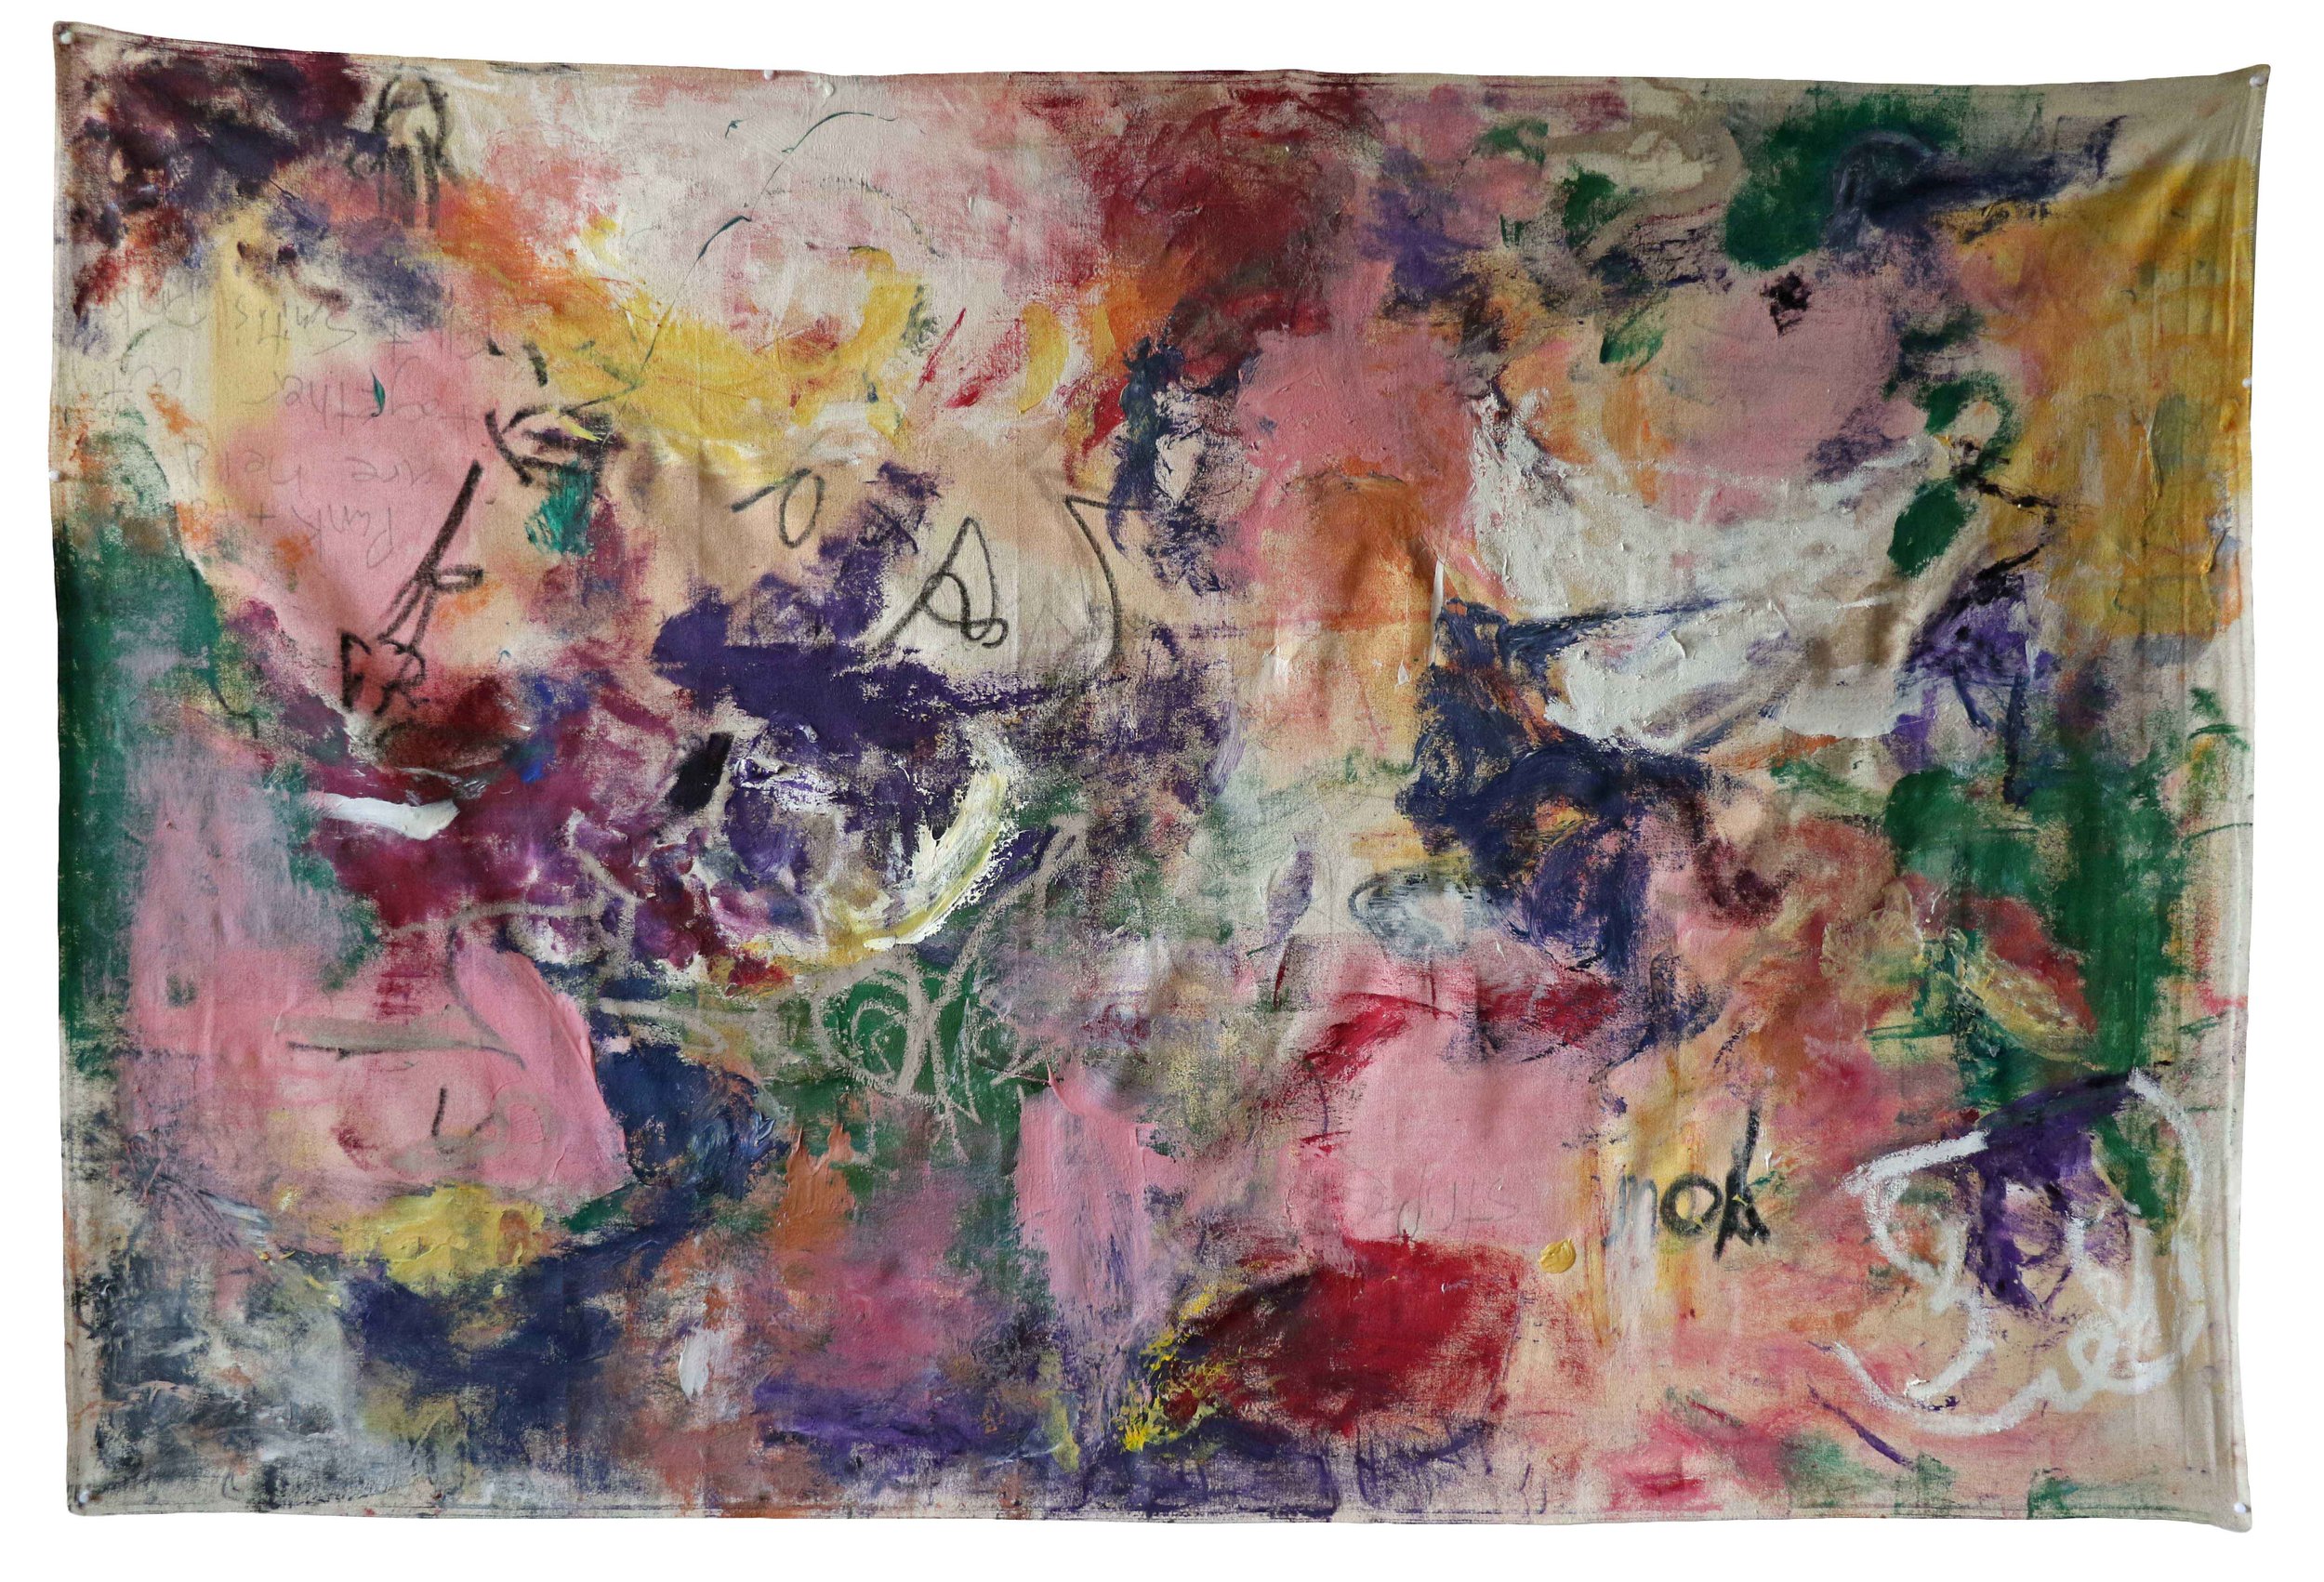   punk &amp; folk are held together by Elliot Smith's pinky , Community Garden, New York City, 2016    oil, graphite, and oil pastel on unprimed canvas    48 x 72 inches 